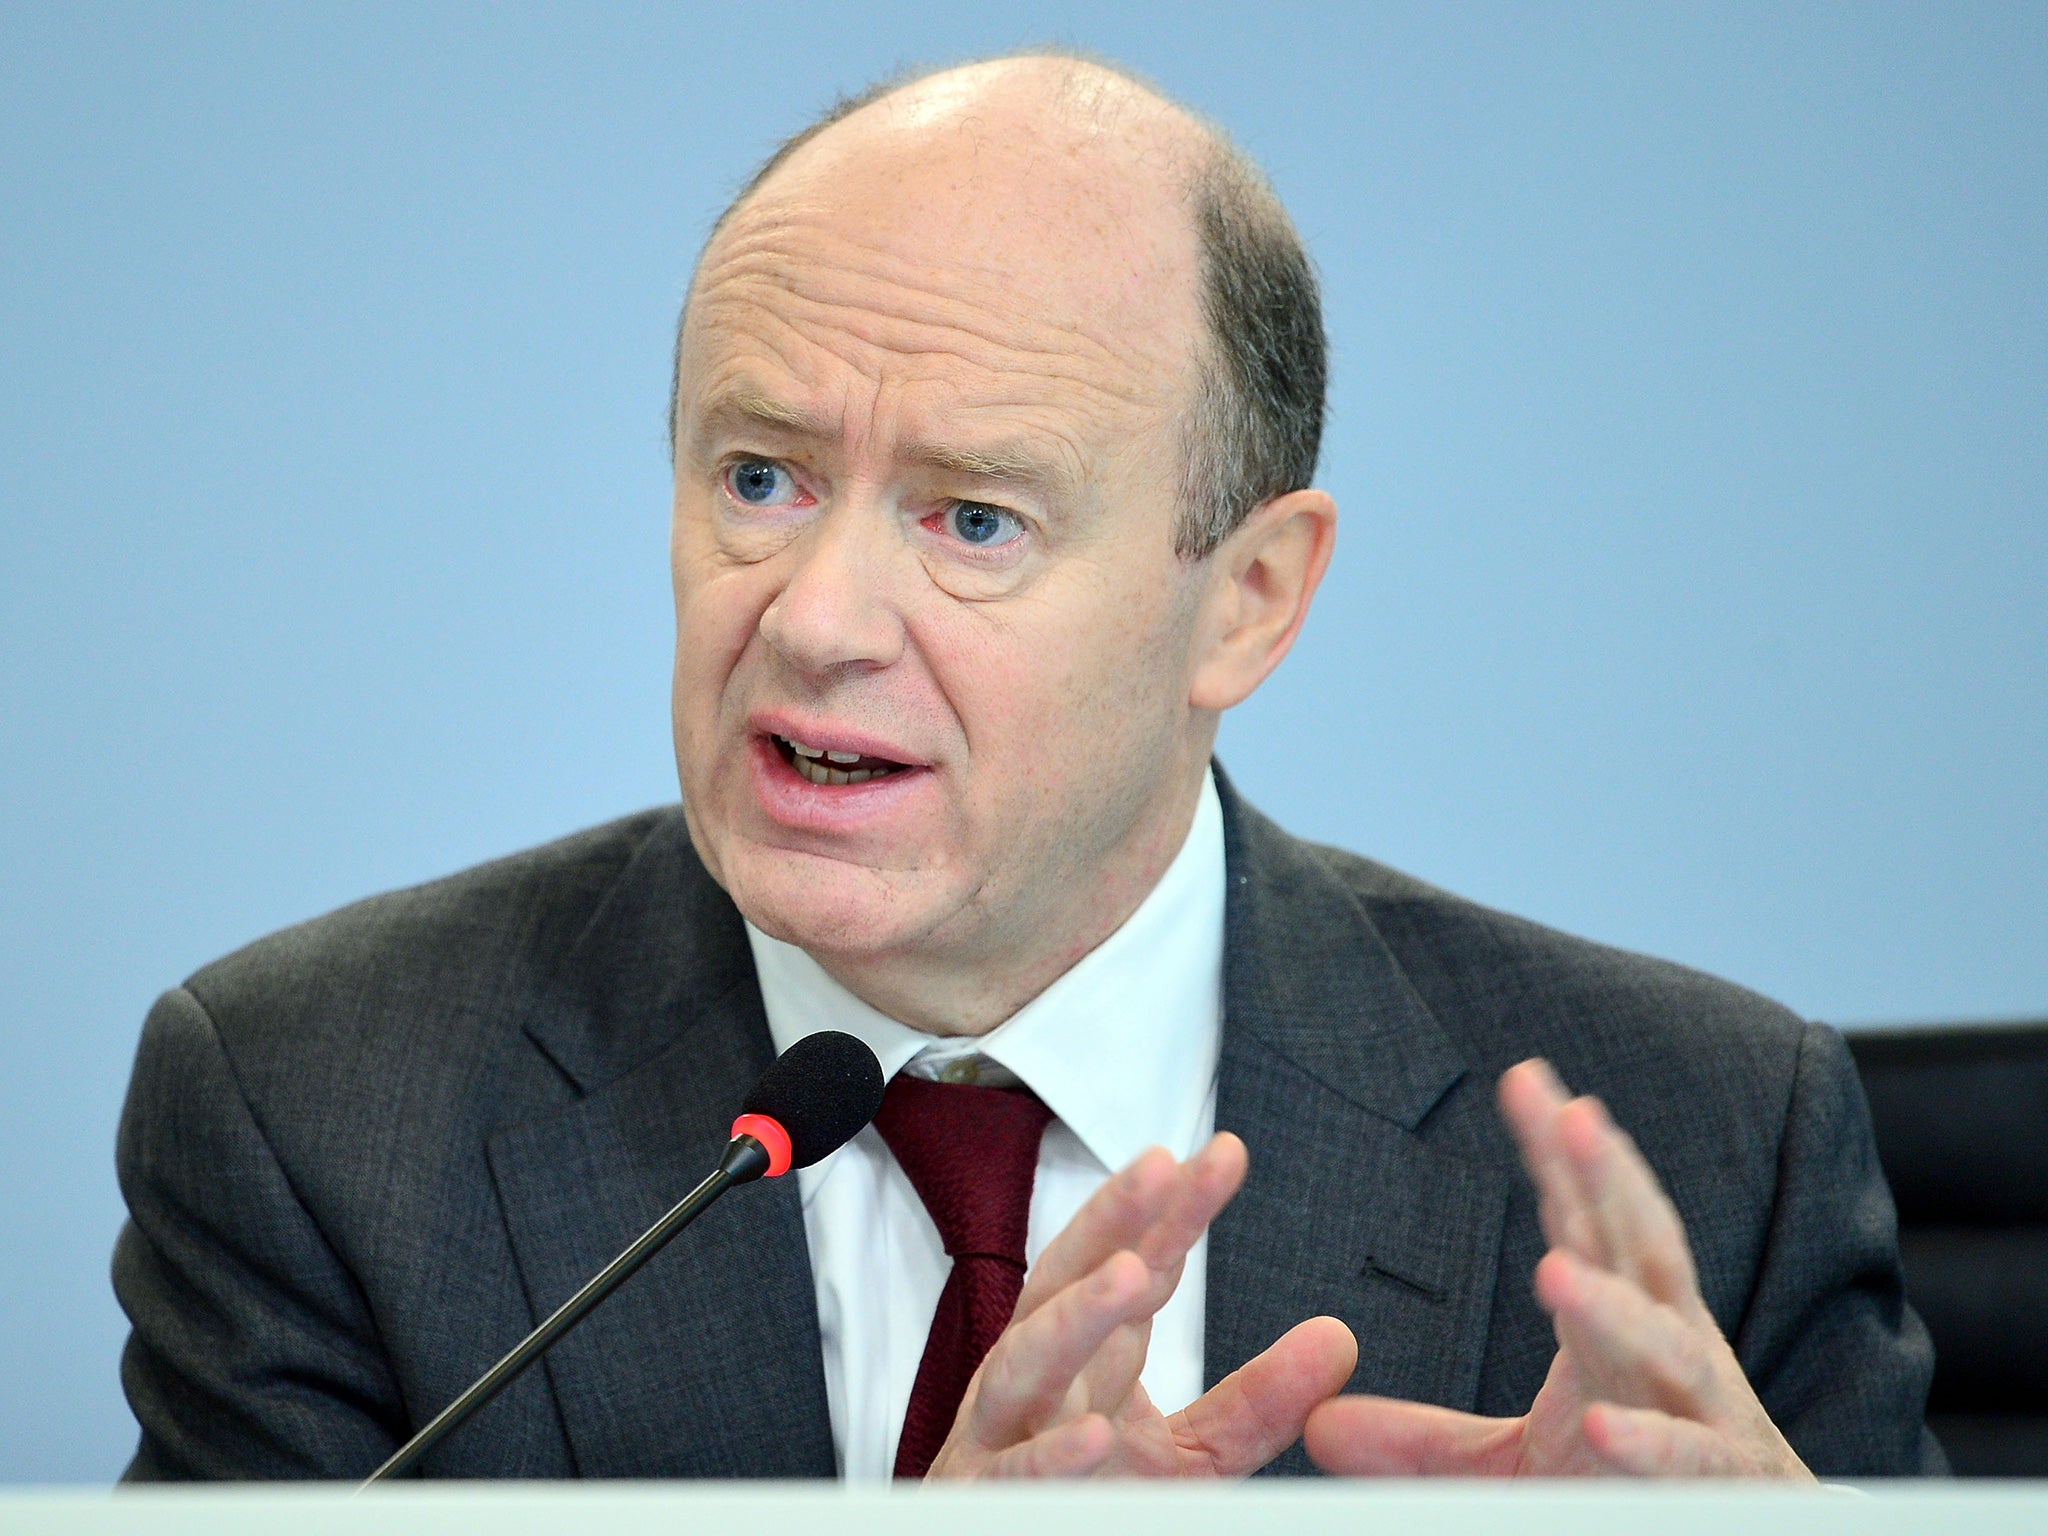 Deutsche Bank CEO John Cryan was forced to issue a statement to reassure investors that the bank is "absolutely rock solid"